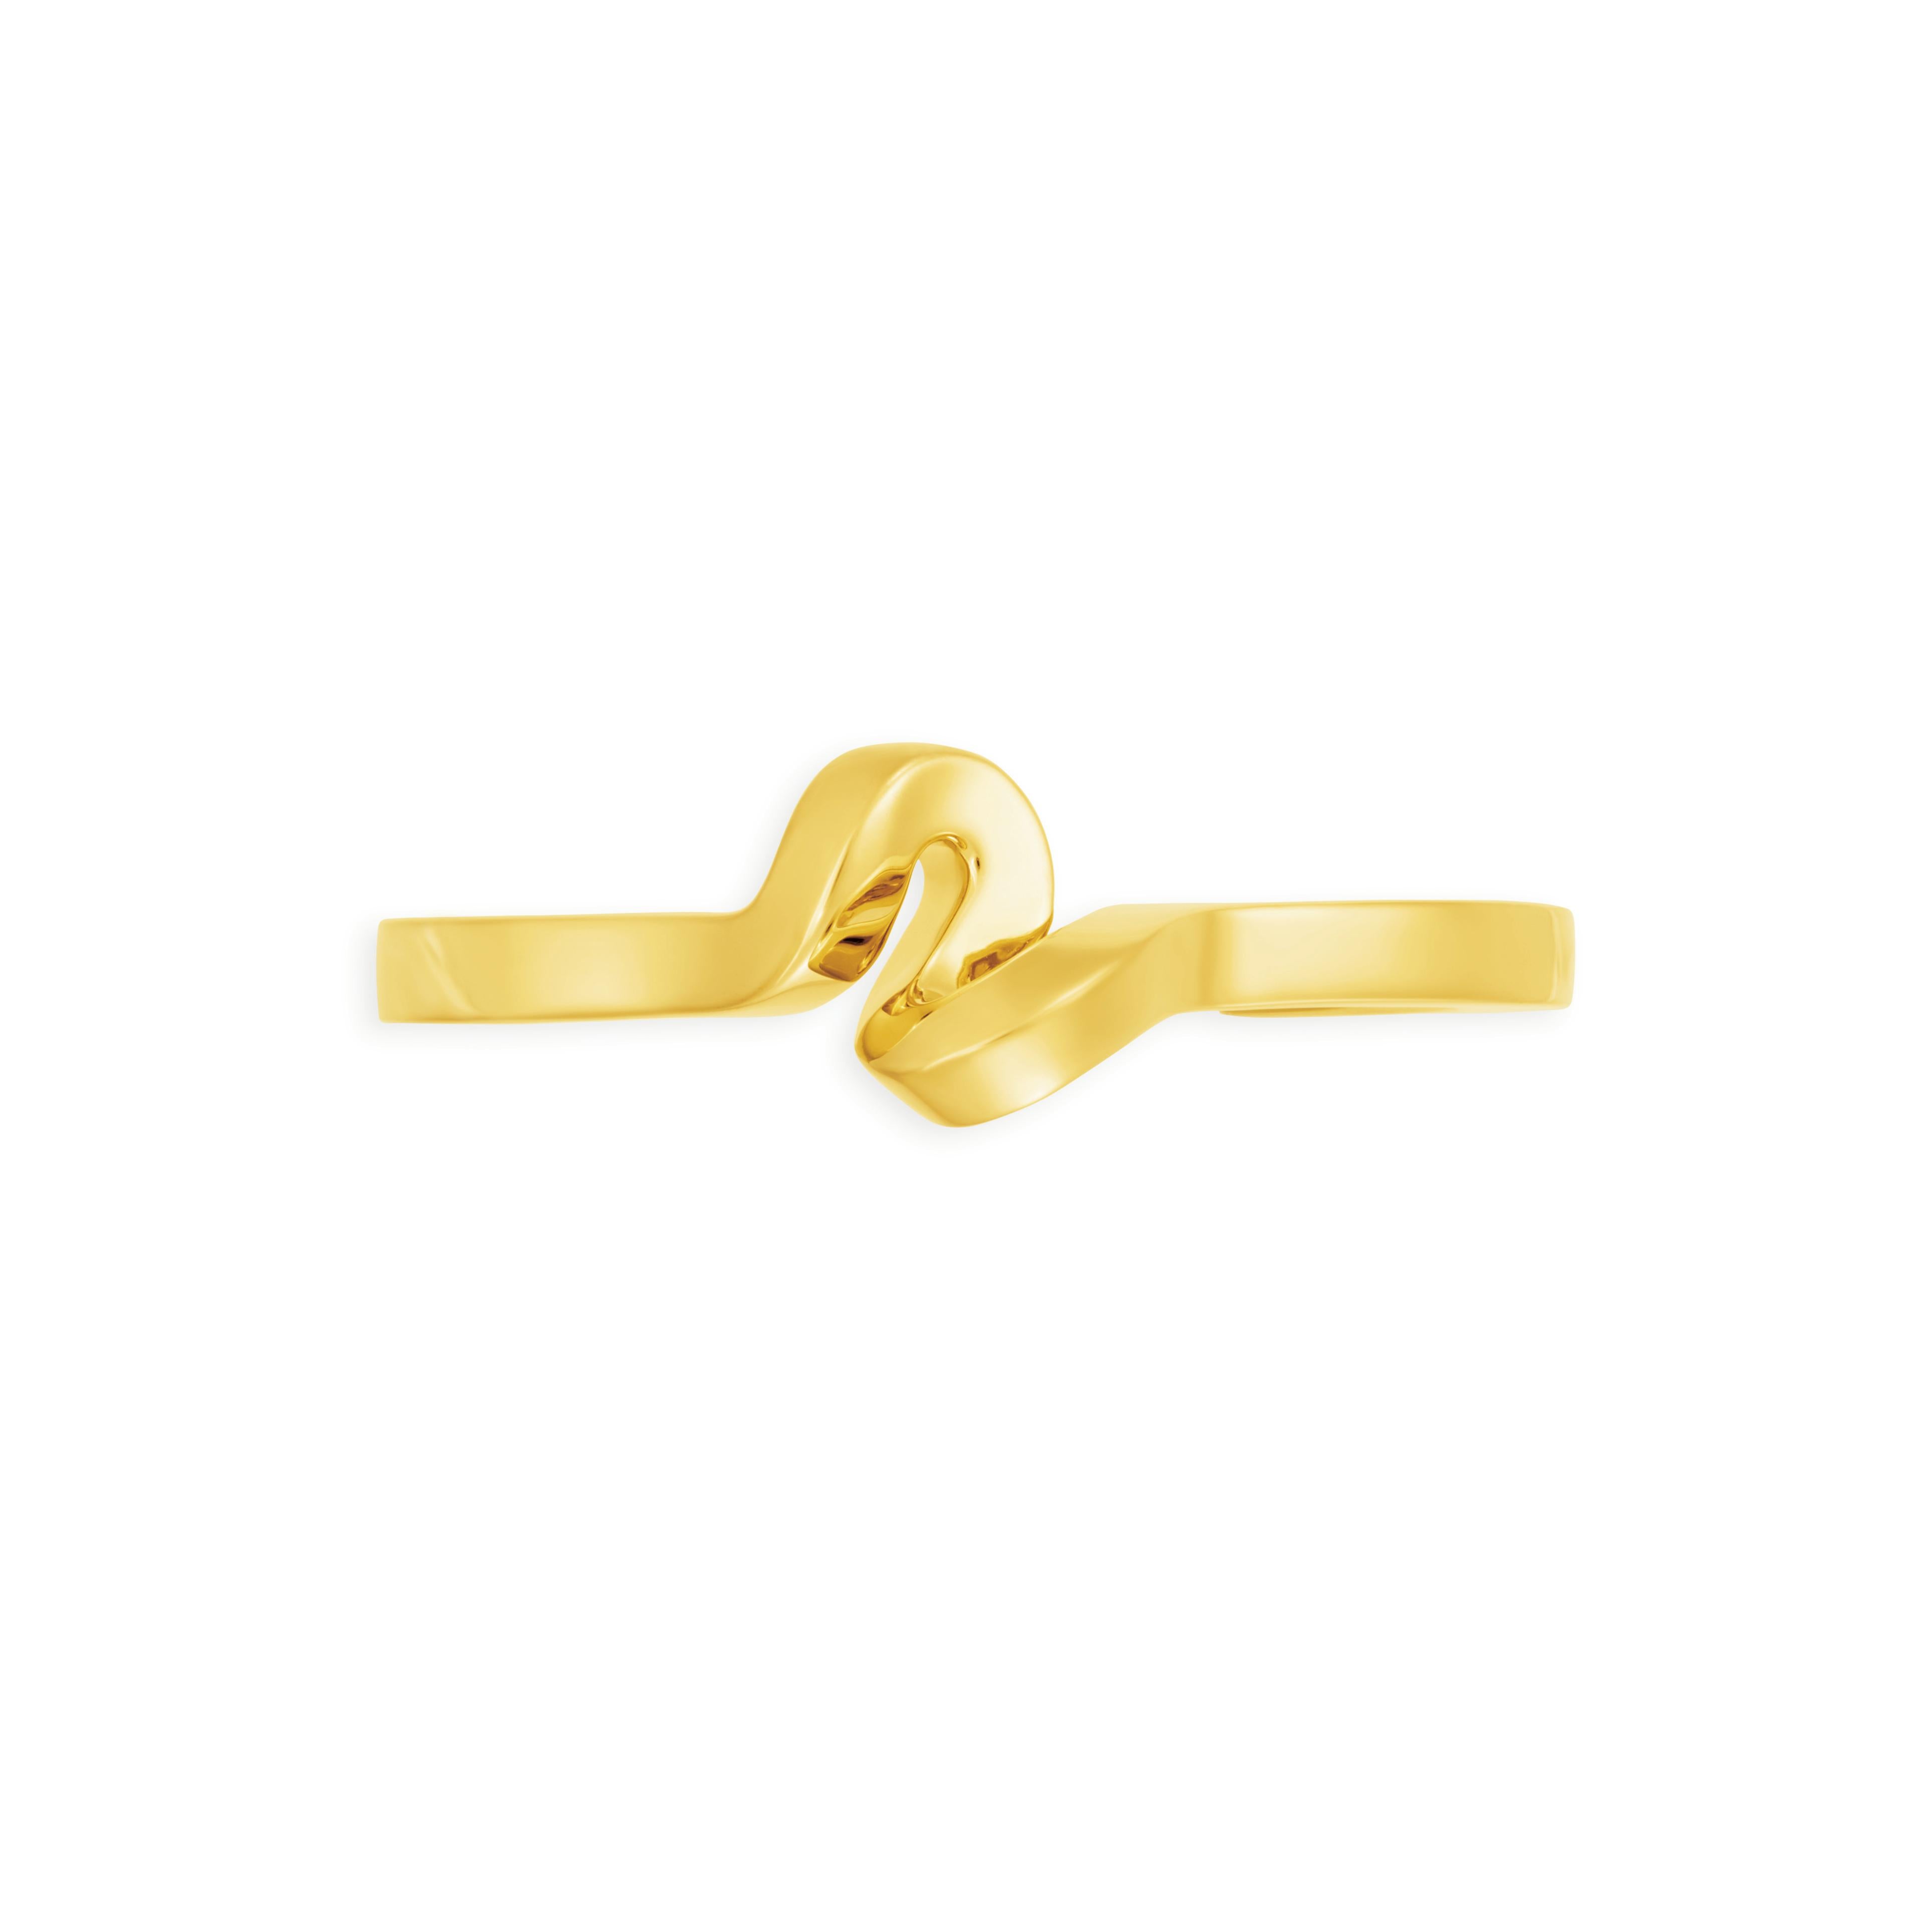 The Interstellar Bracelet, by Mistova, is from the NOVA 01 collection which explores the transition from square to round. The bracelet is made from the finest  18k gold.  A true statement piece with a modernist twist.